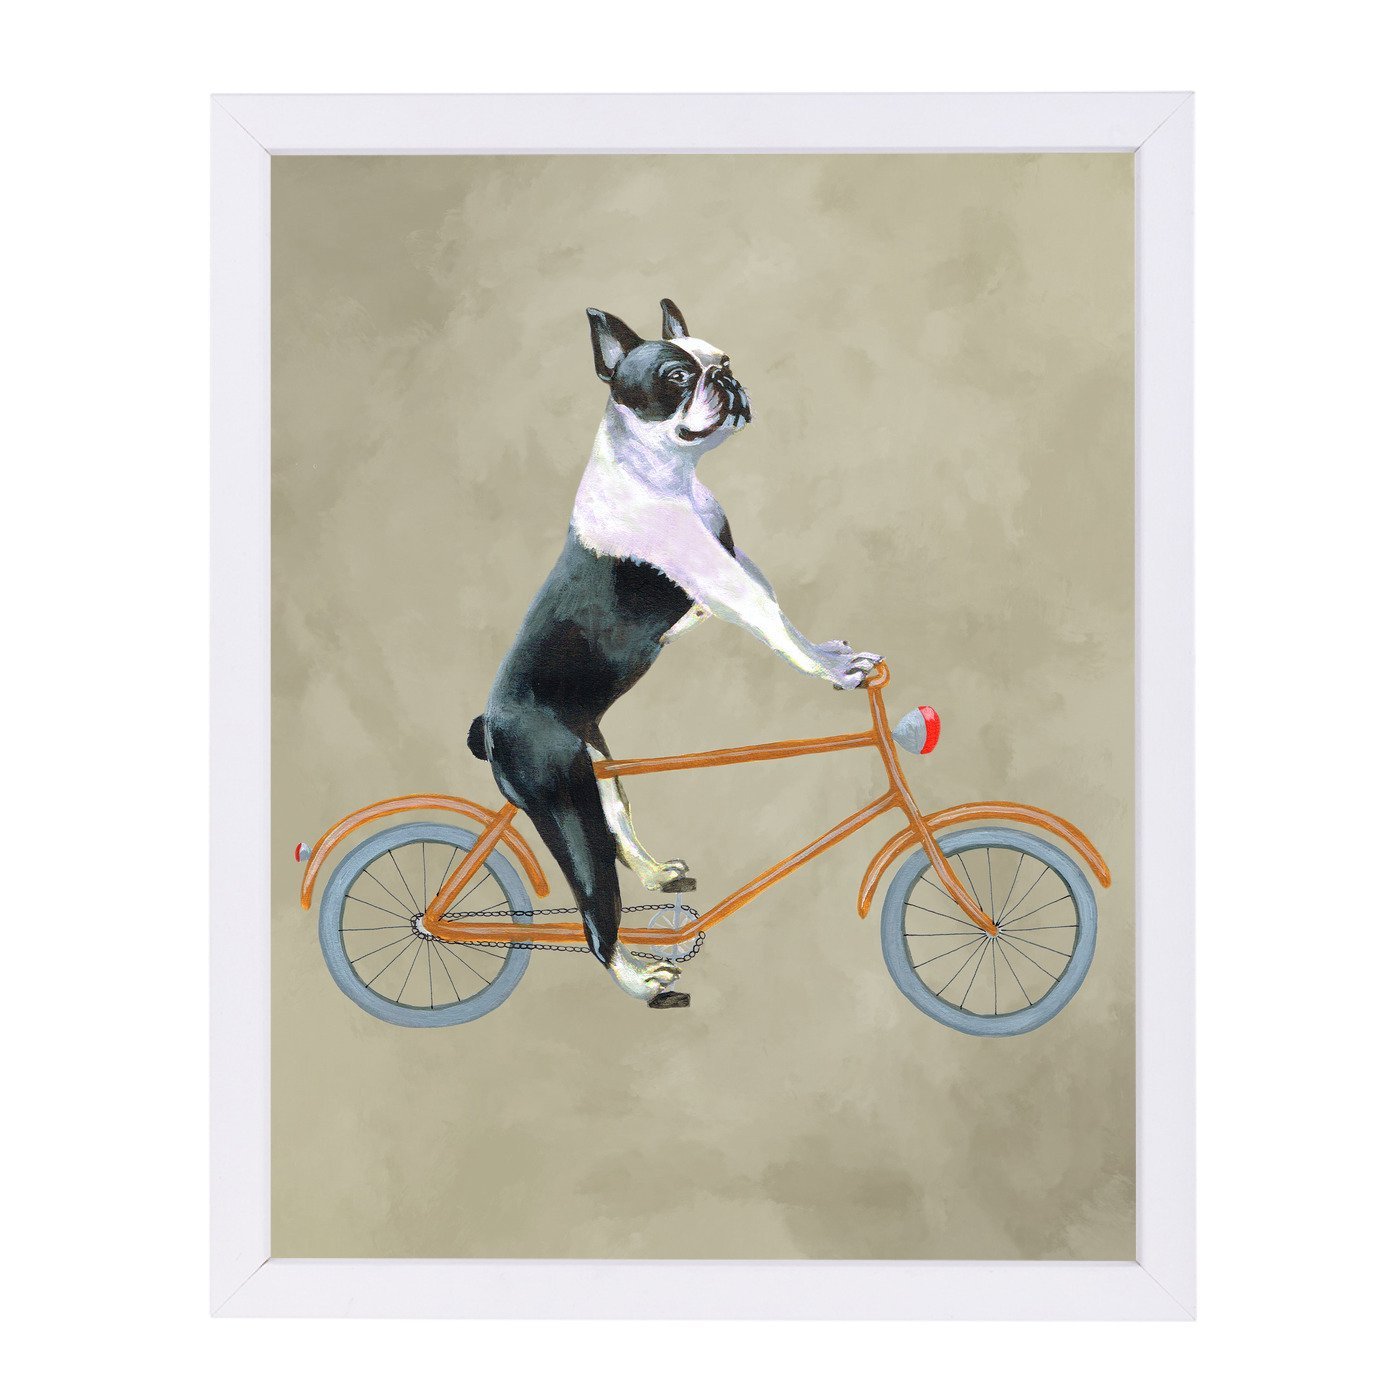 Boston Terrier On Bicycle By Coco De Paris - Framed Print - Americanflat